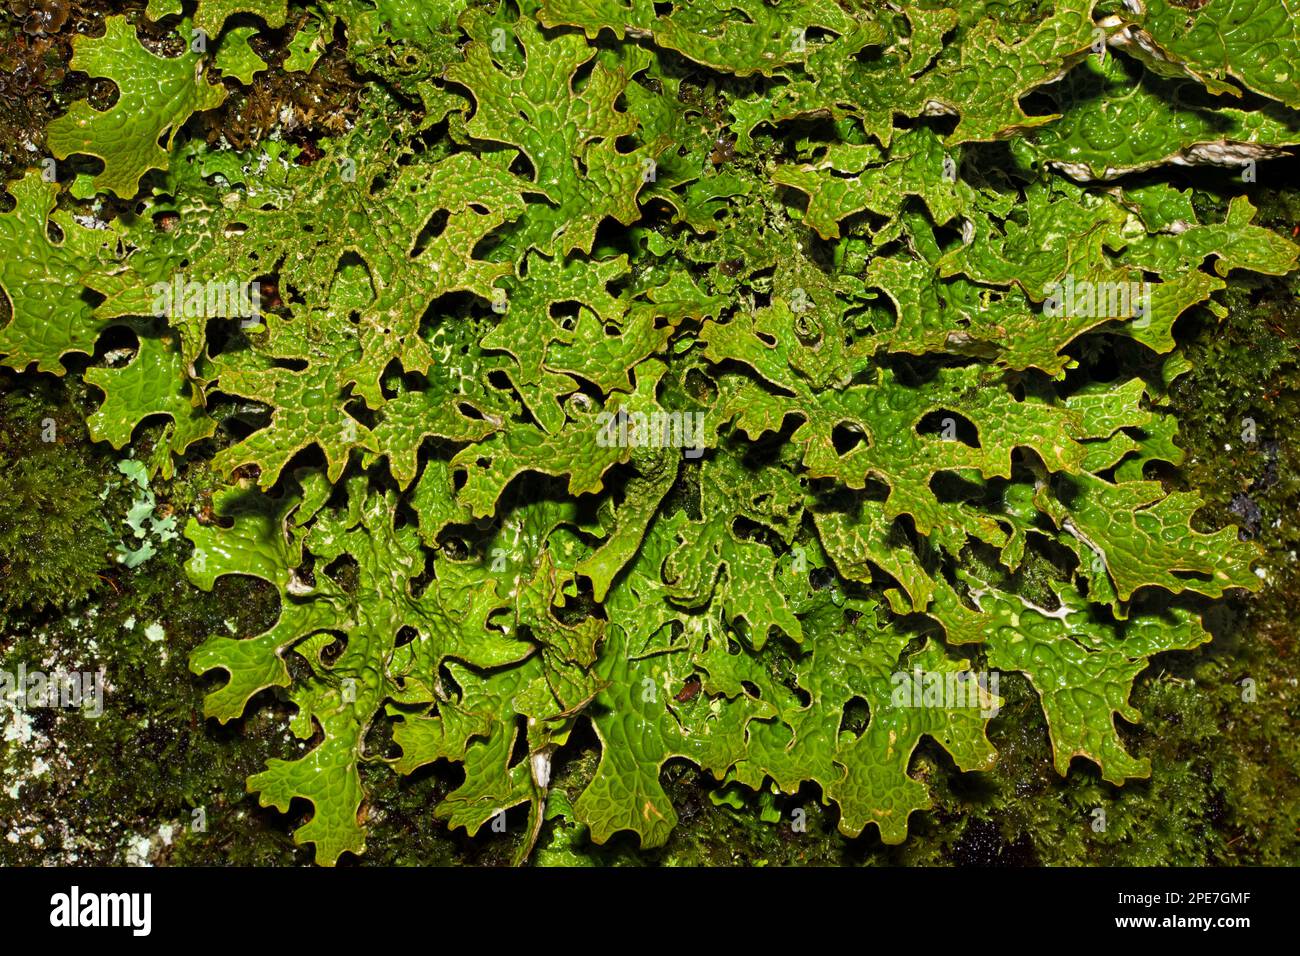 Lobaria pulmonaria (tree lungwort) is an epiphytic lichen found in ancient woodland. It occurs in Europe, Asia, North America and Africa. Stock Photo